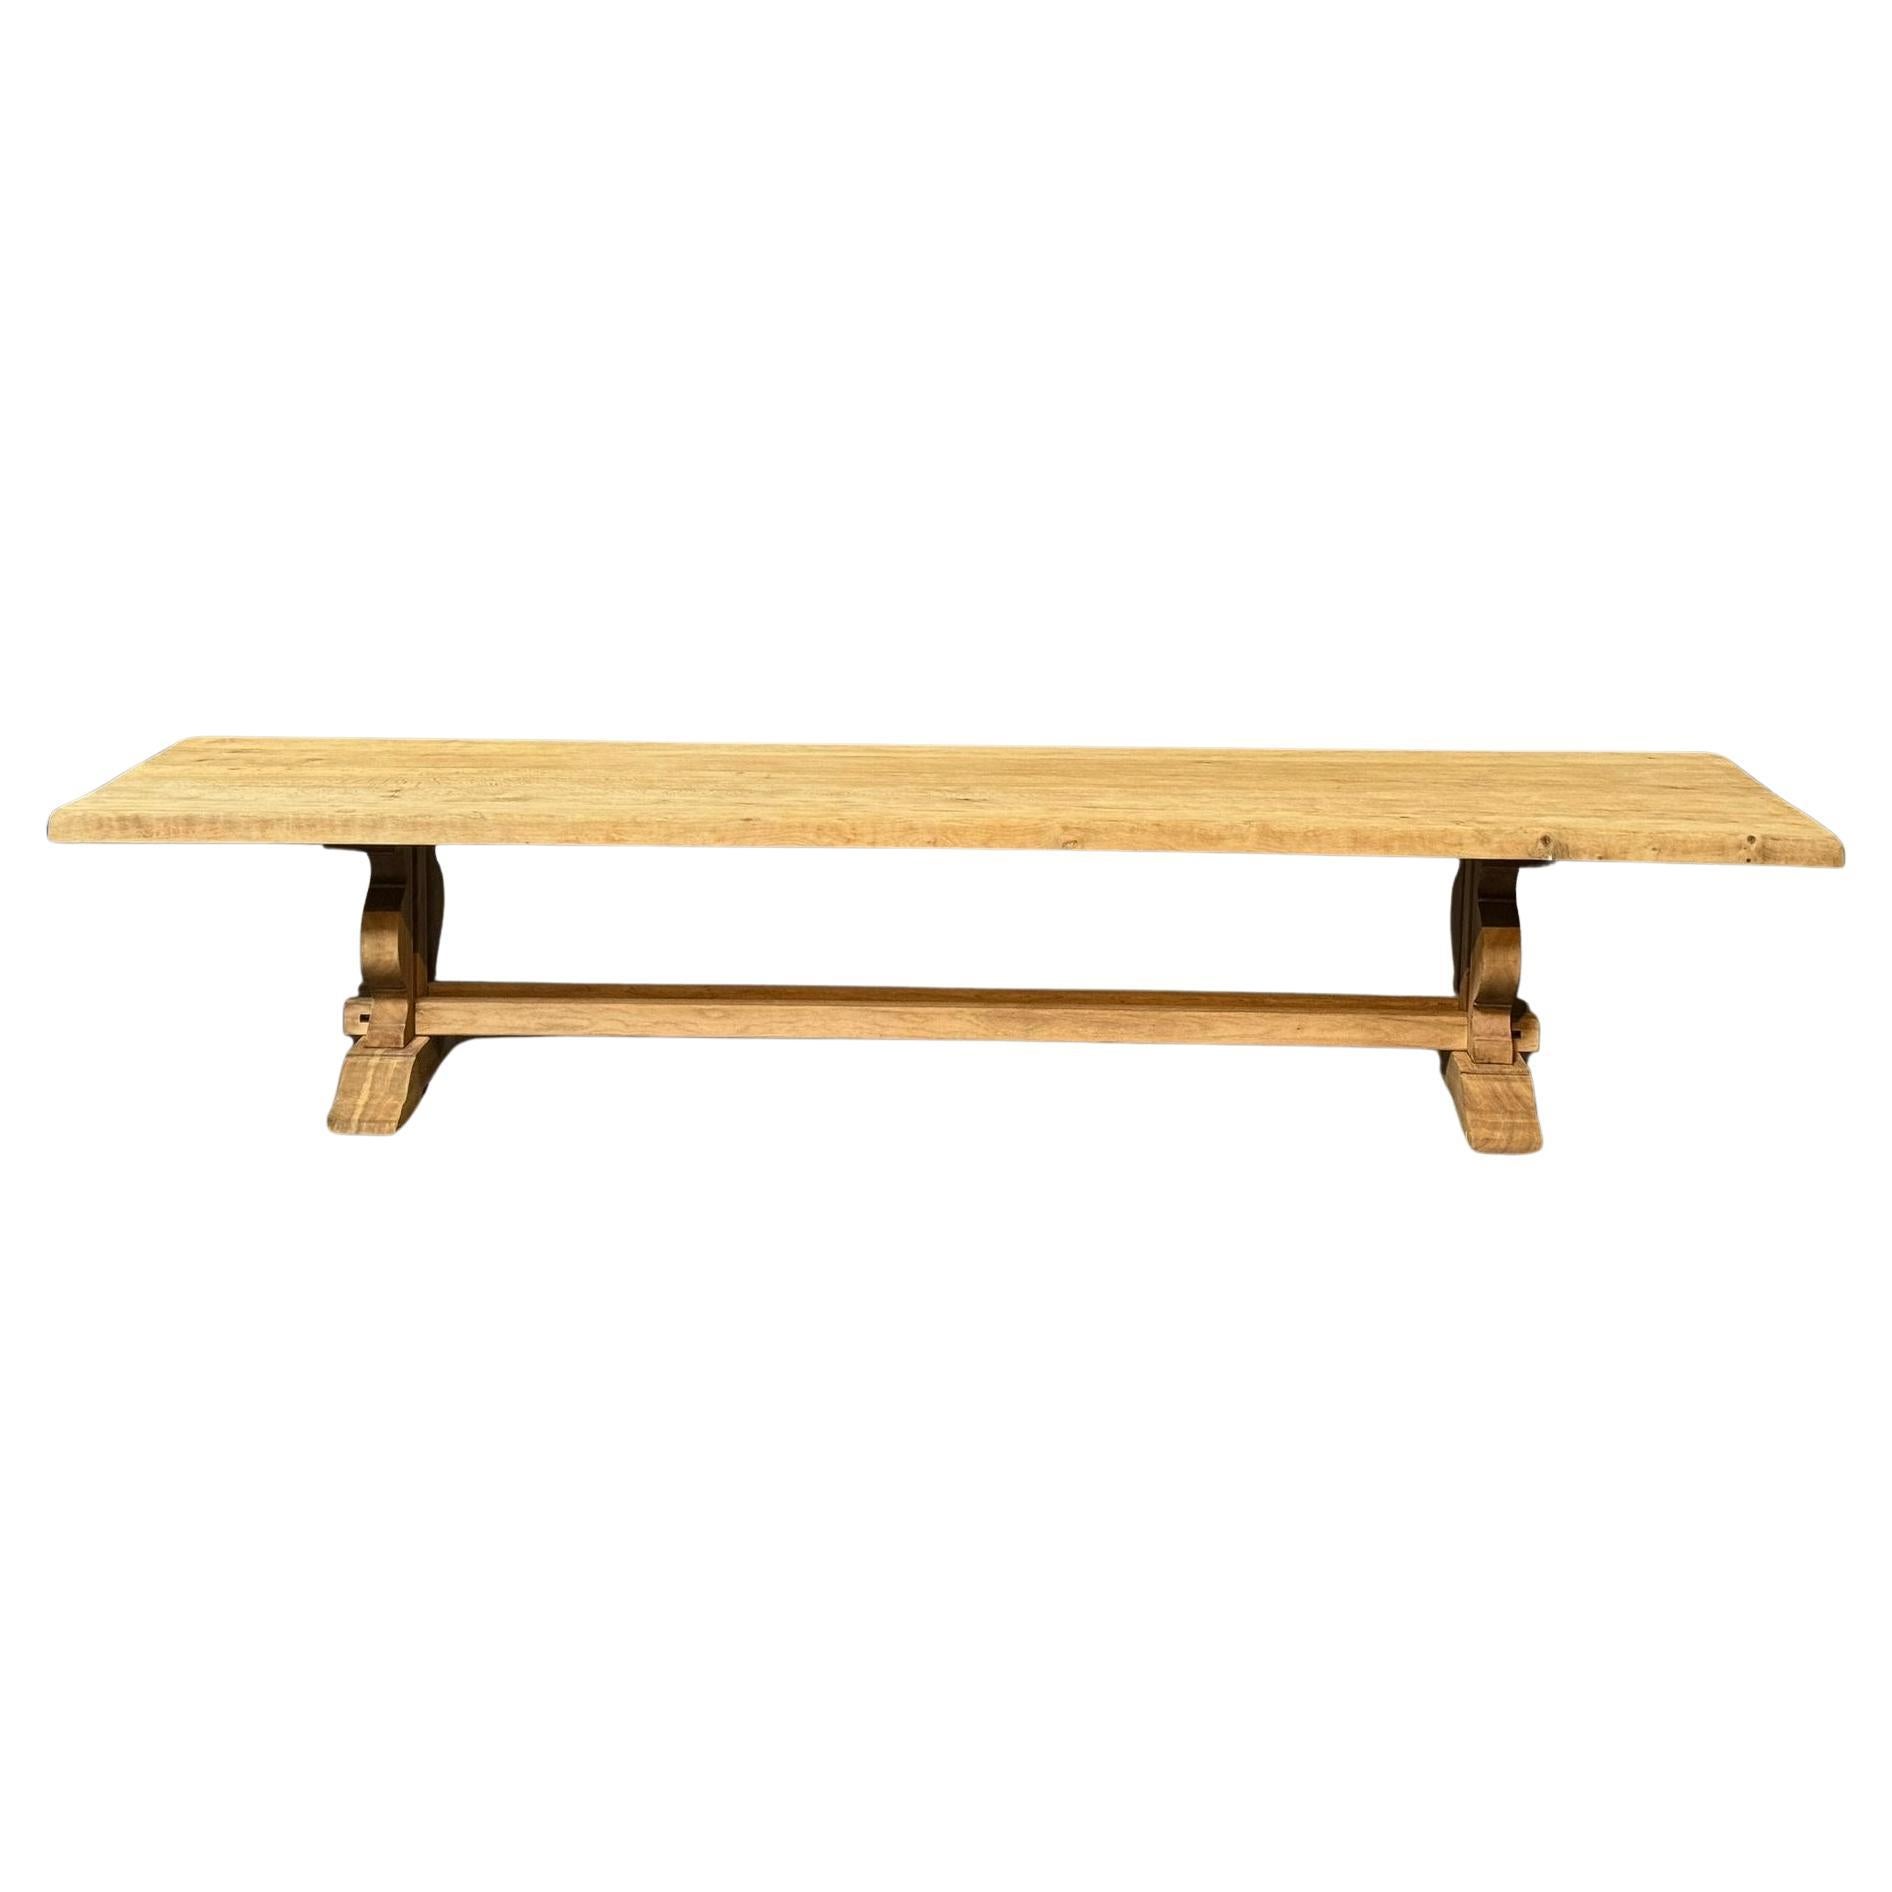 Massive 4 Meter French Bleached Oak Trestle Farmhouse Dining Table  For Sale